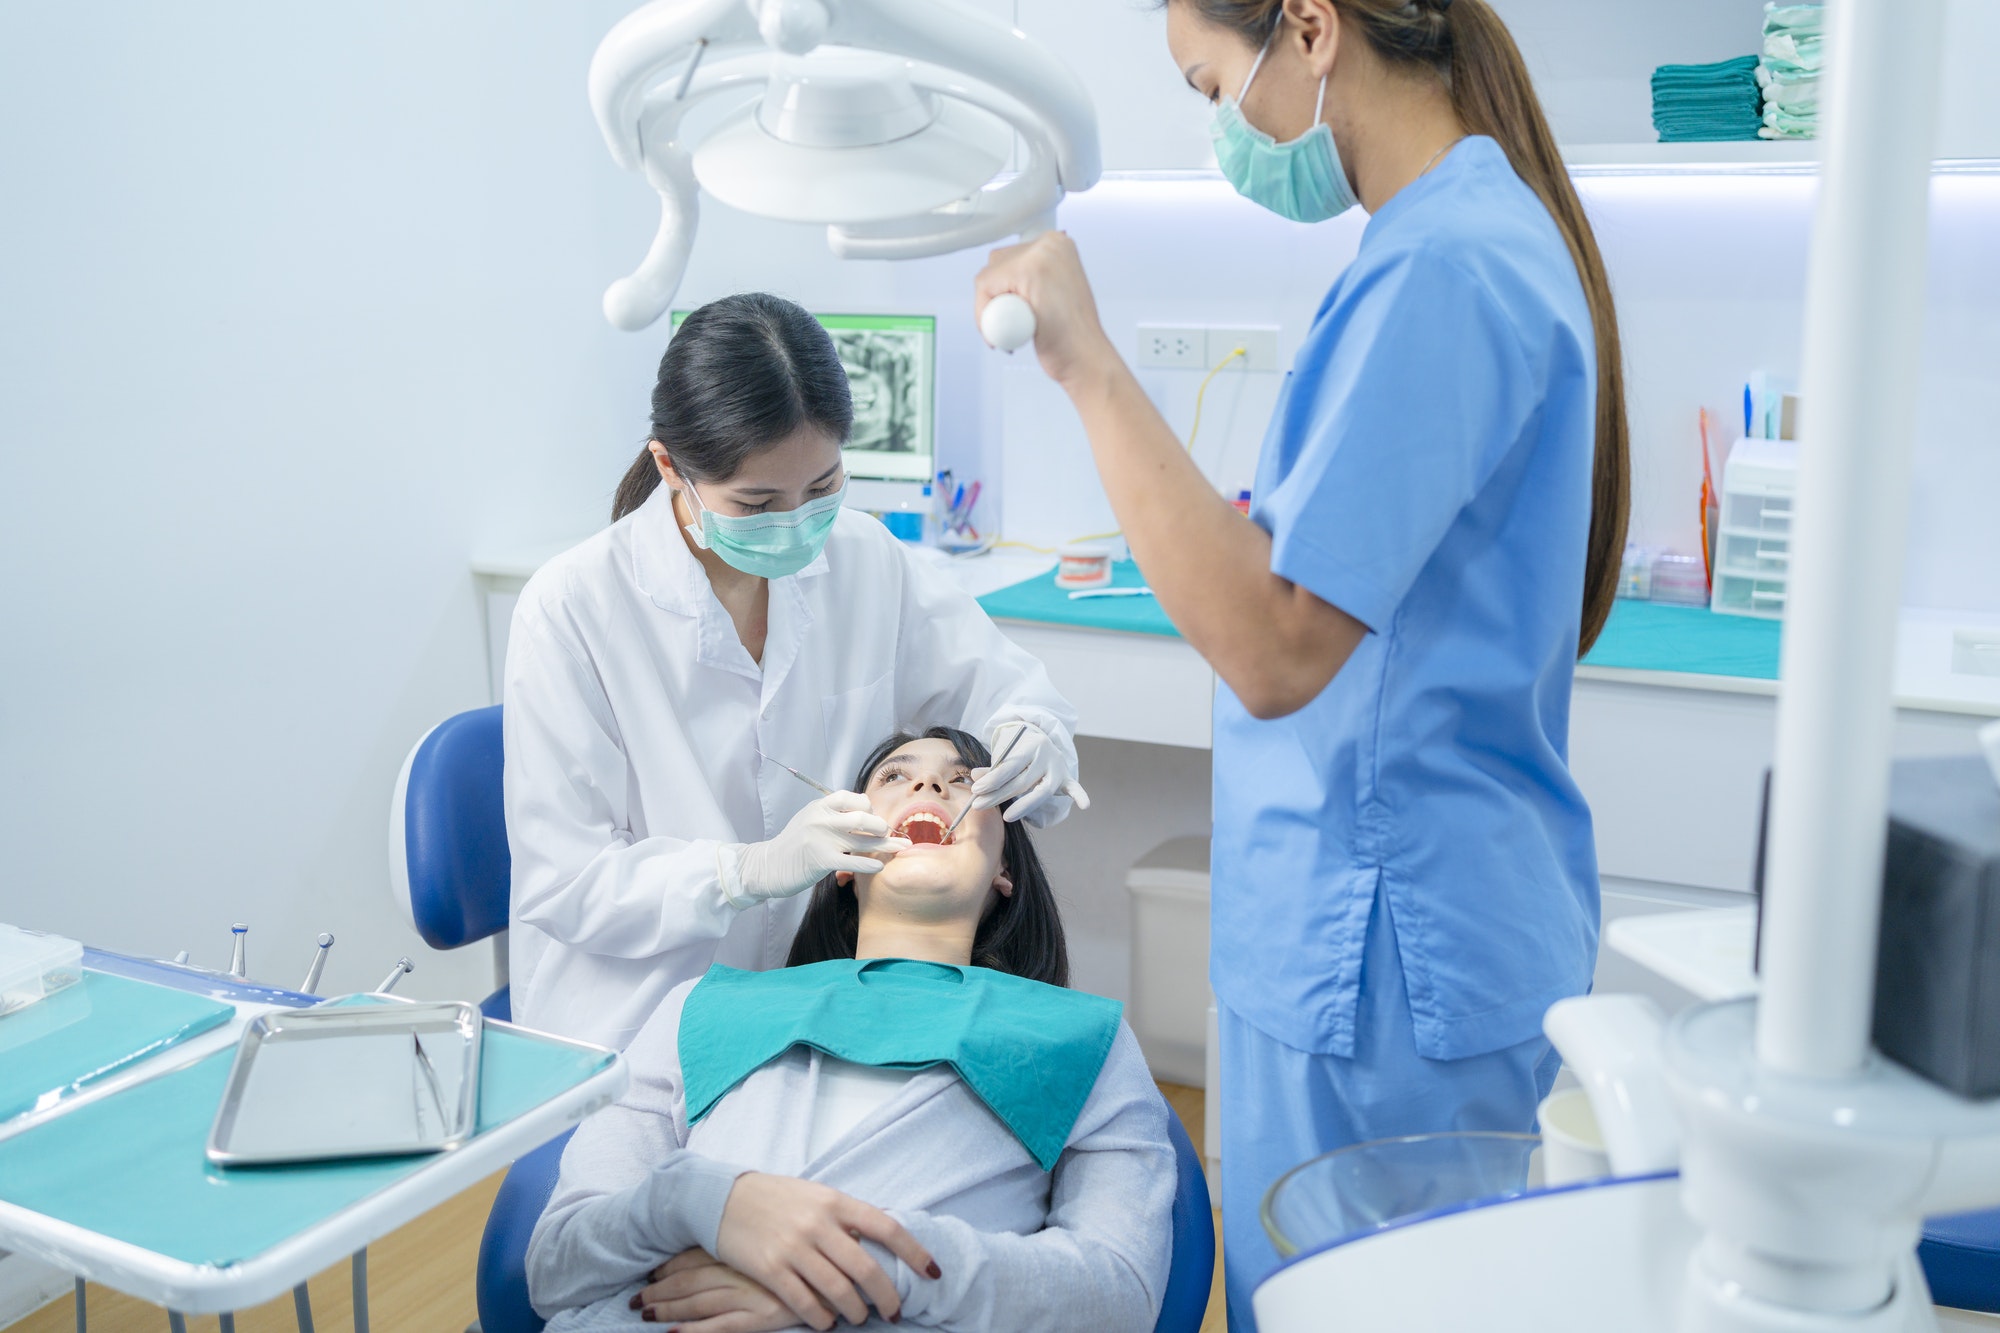 Asian dentist adjust dental surgical light then starts examining tooth patient at dental clinic